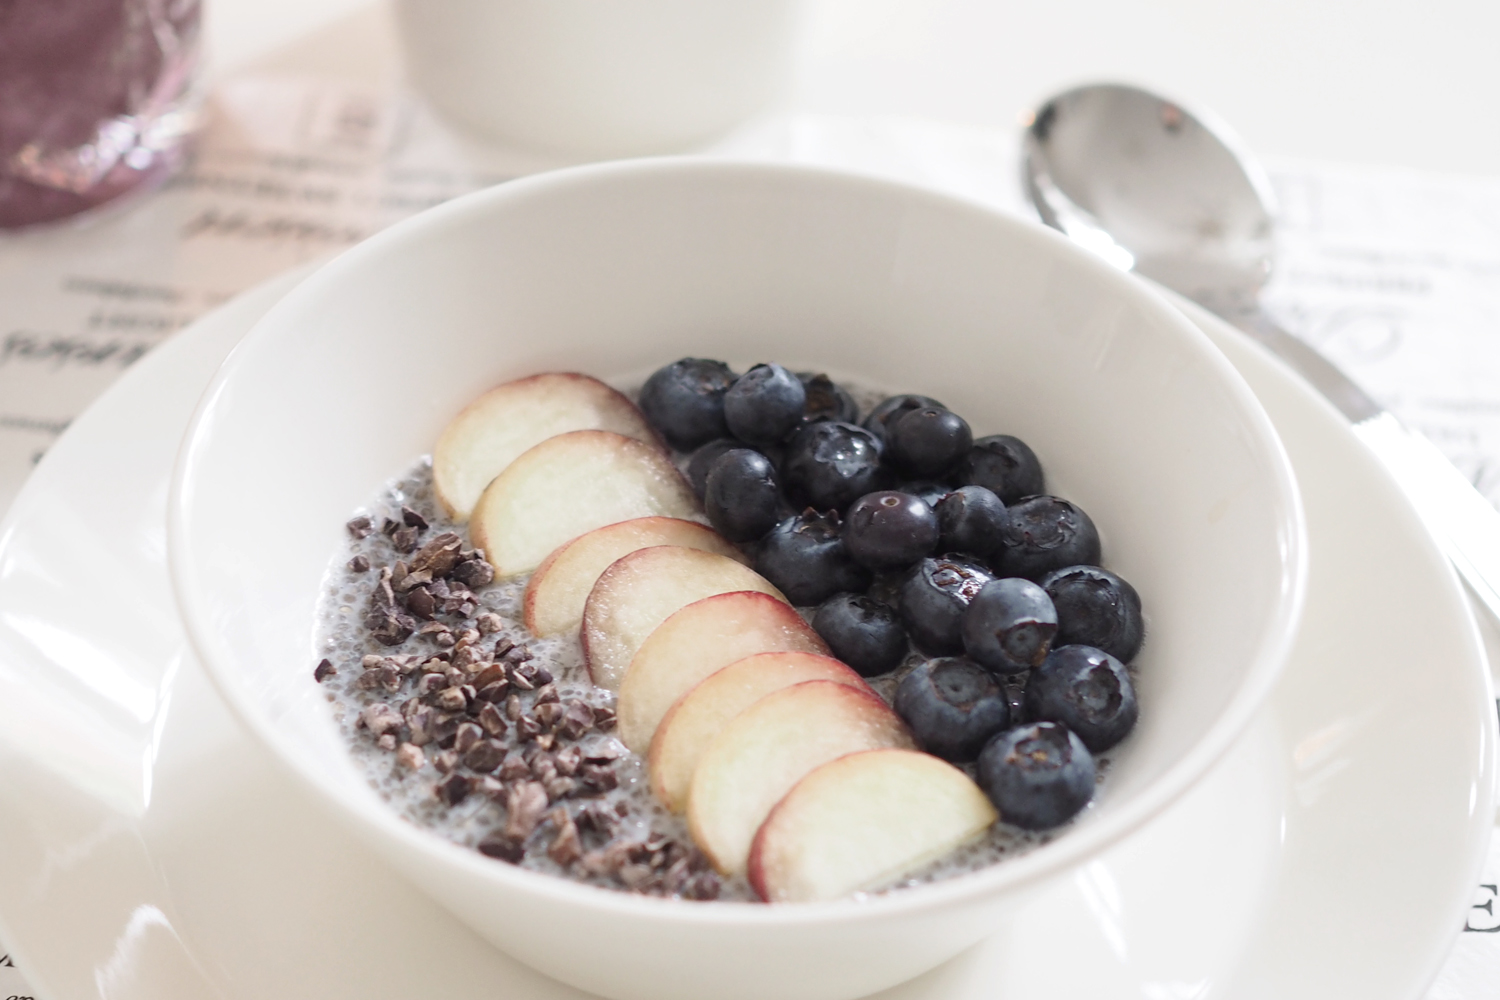 Char and the city - Sweet breakfast table setting for two - yummy chia-pudding recipe